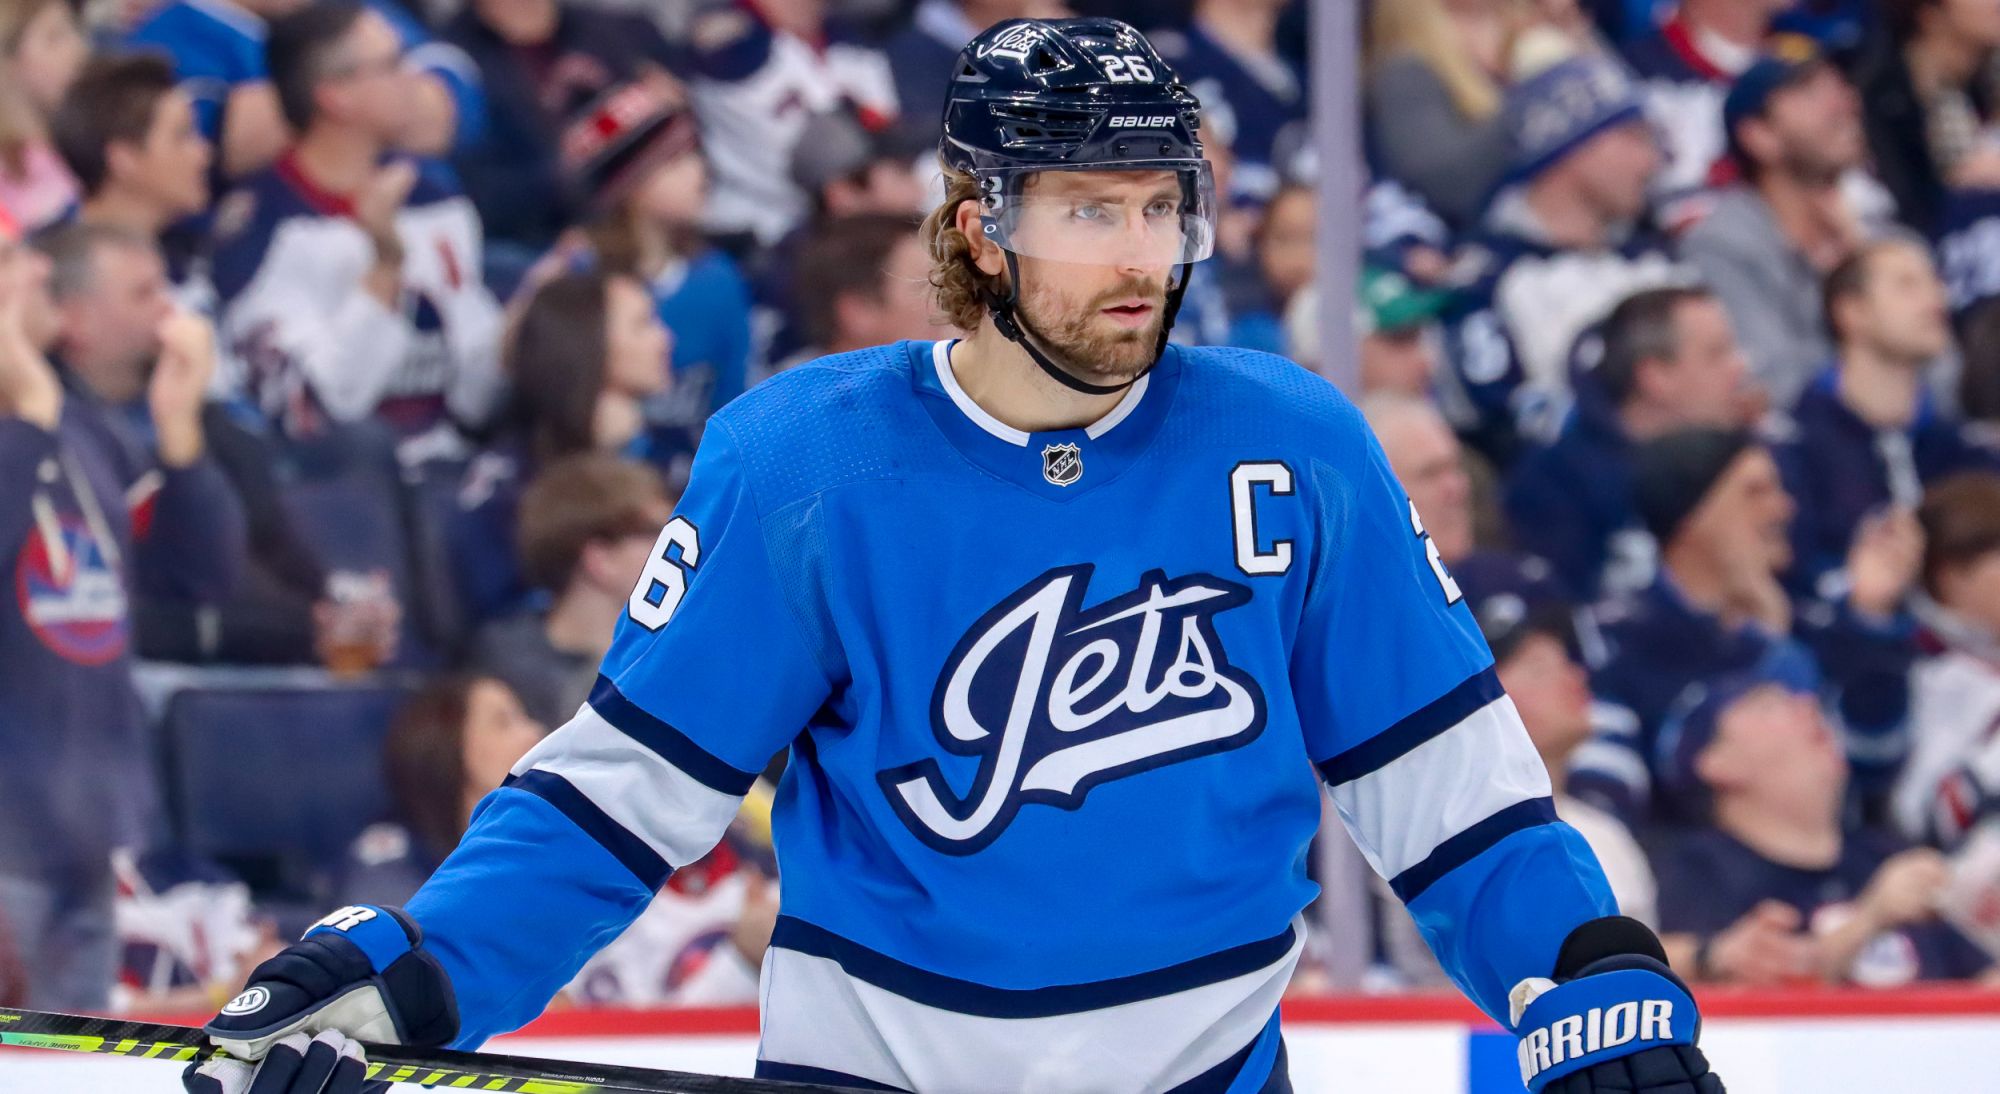 Off the ice, former Gopher Blake Wheeler is Mr. Mum during pandemic